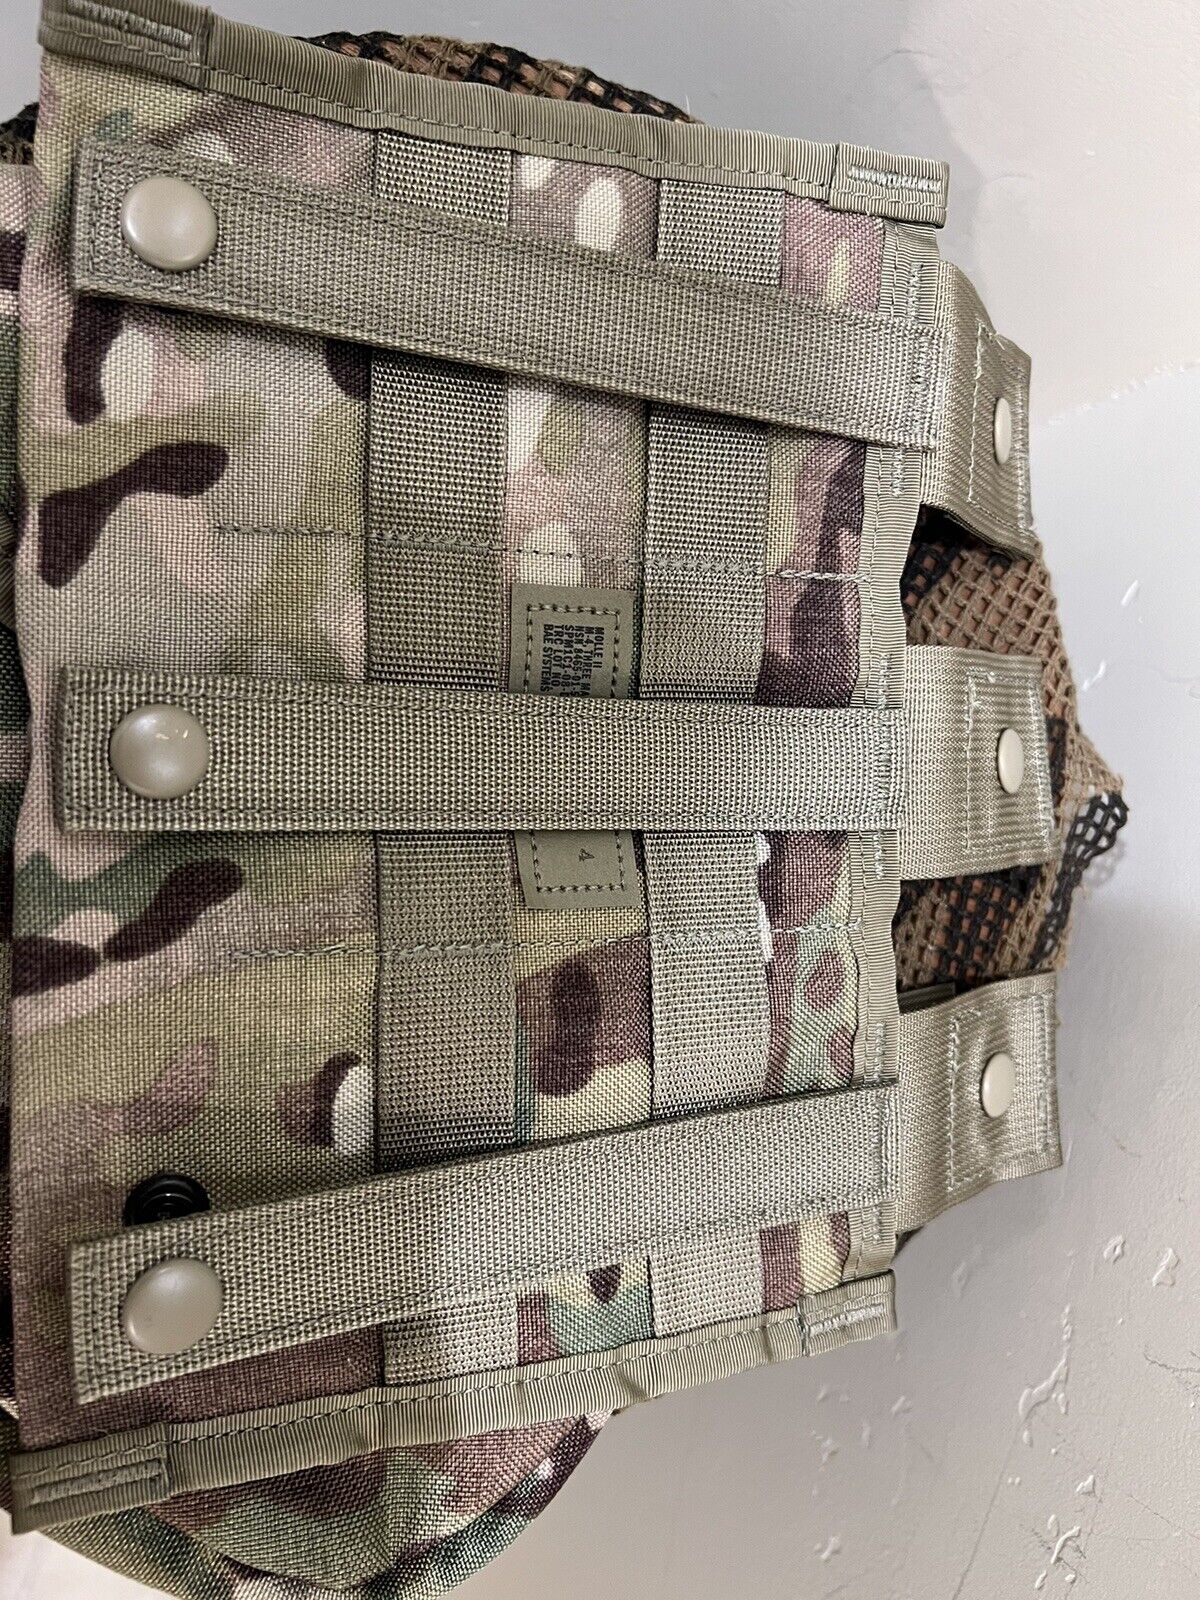 NOS US MILITARY ISSUE MOLLE II MFOUR 3 MAG SIDE BY SIDE POUCH MULTICAM USGI